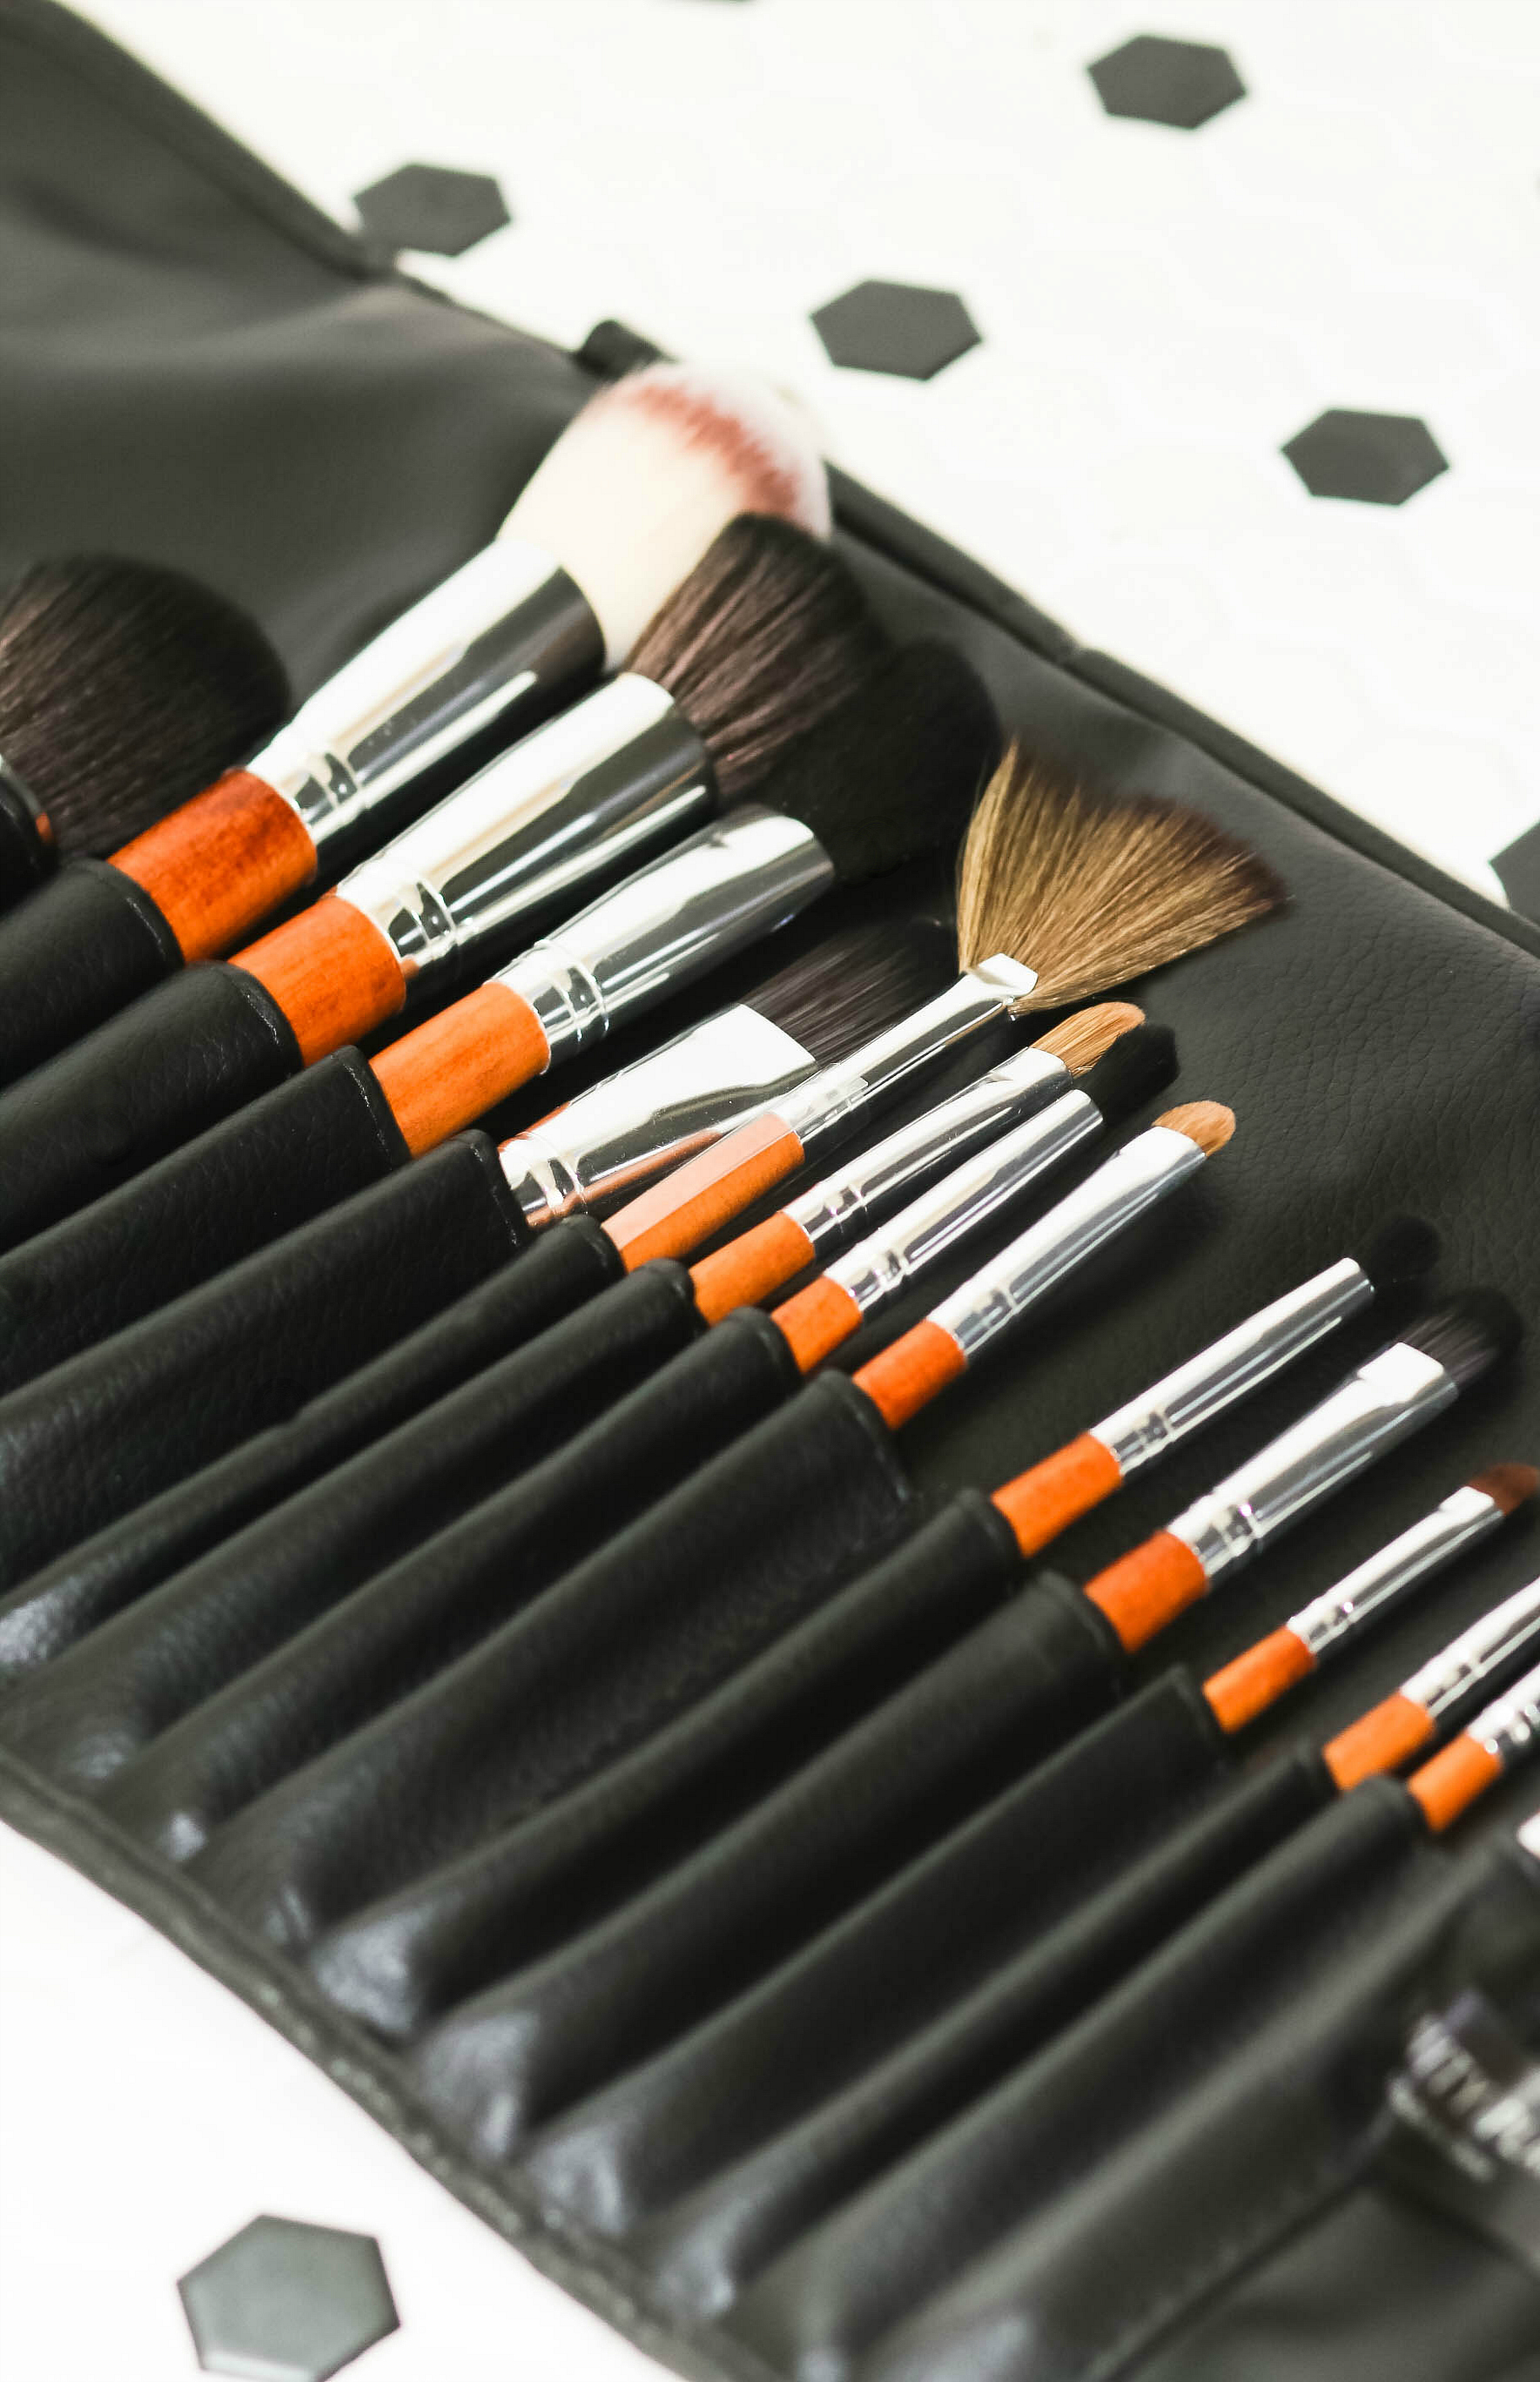 15 Different Vanity Planet Makeup Brushes and Their Uses